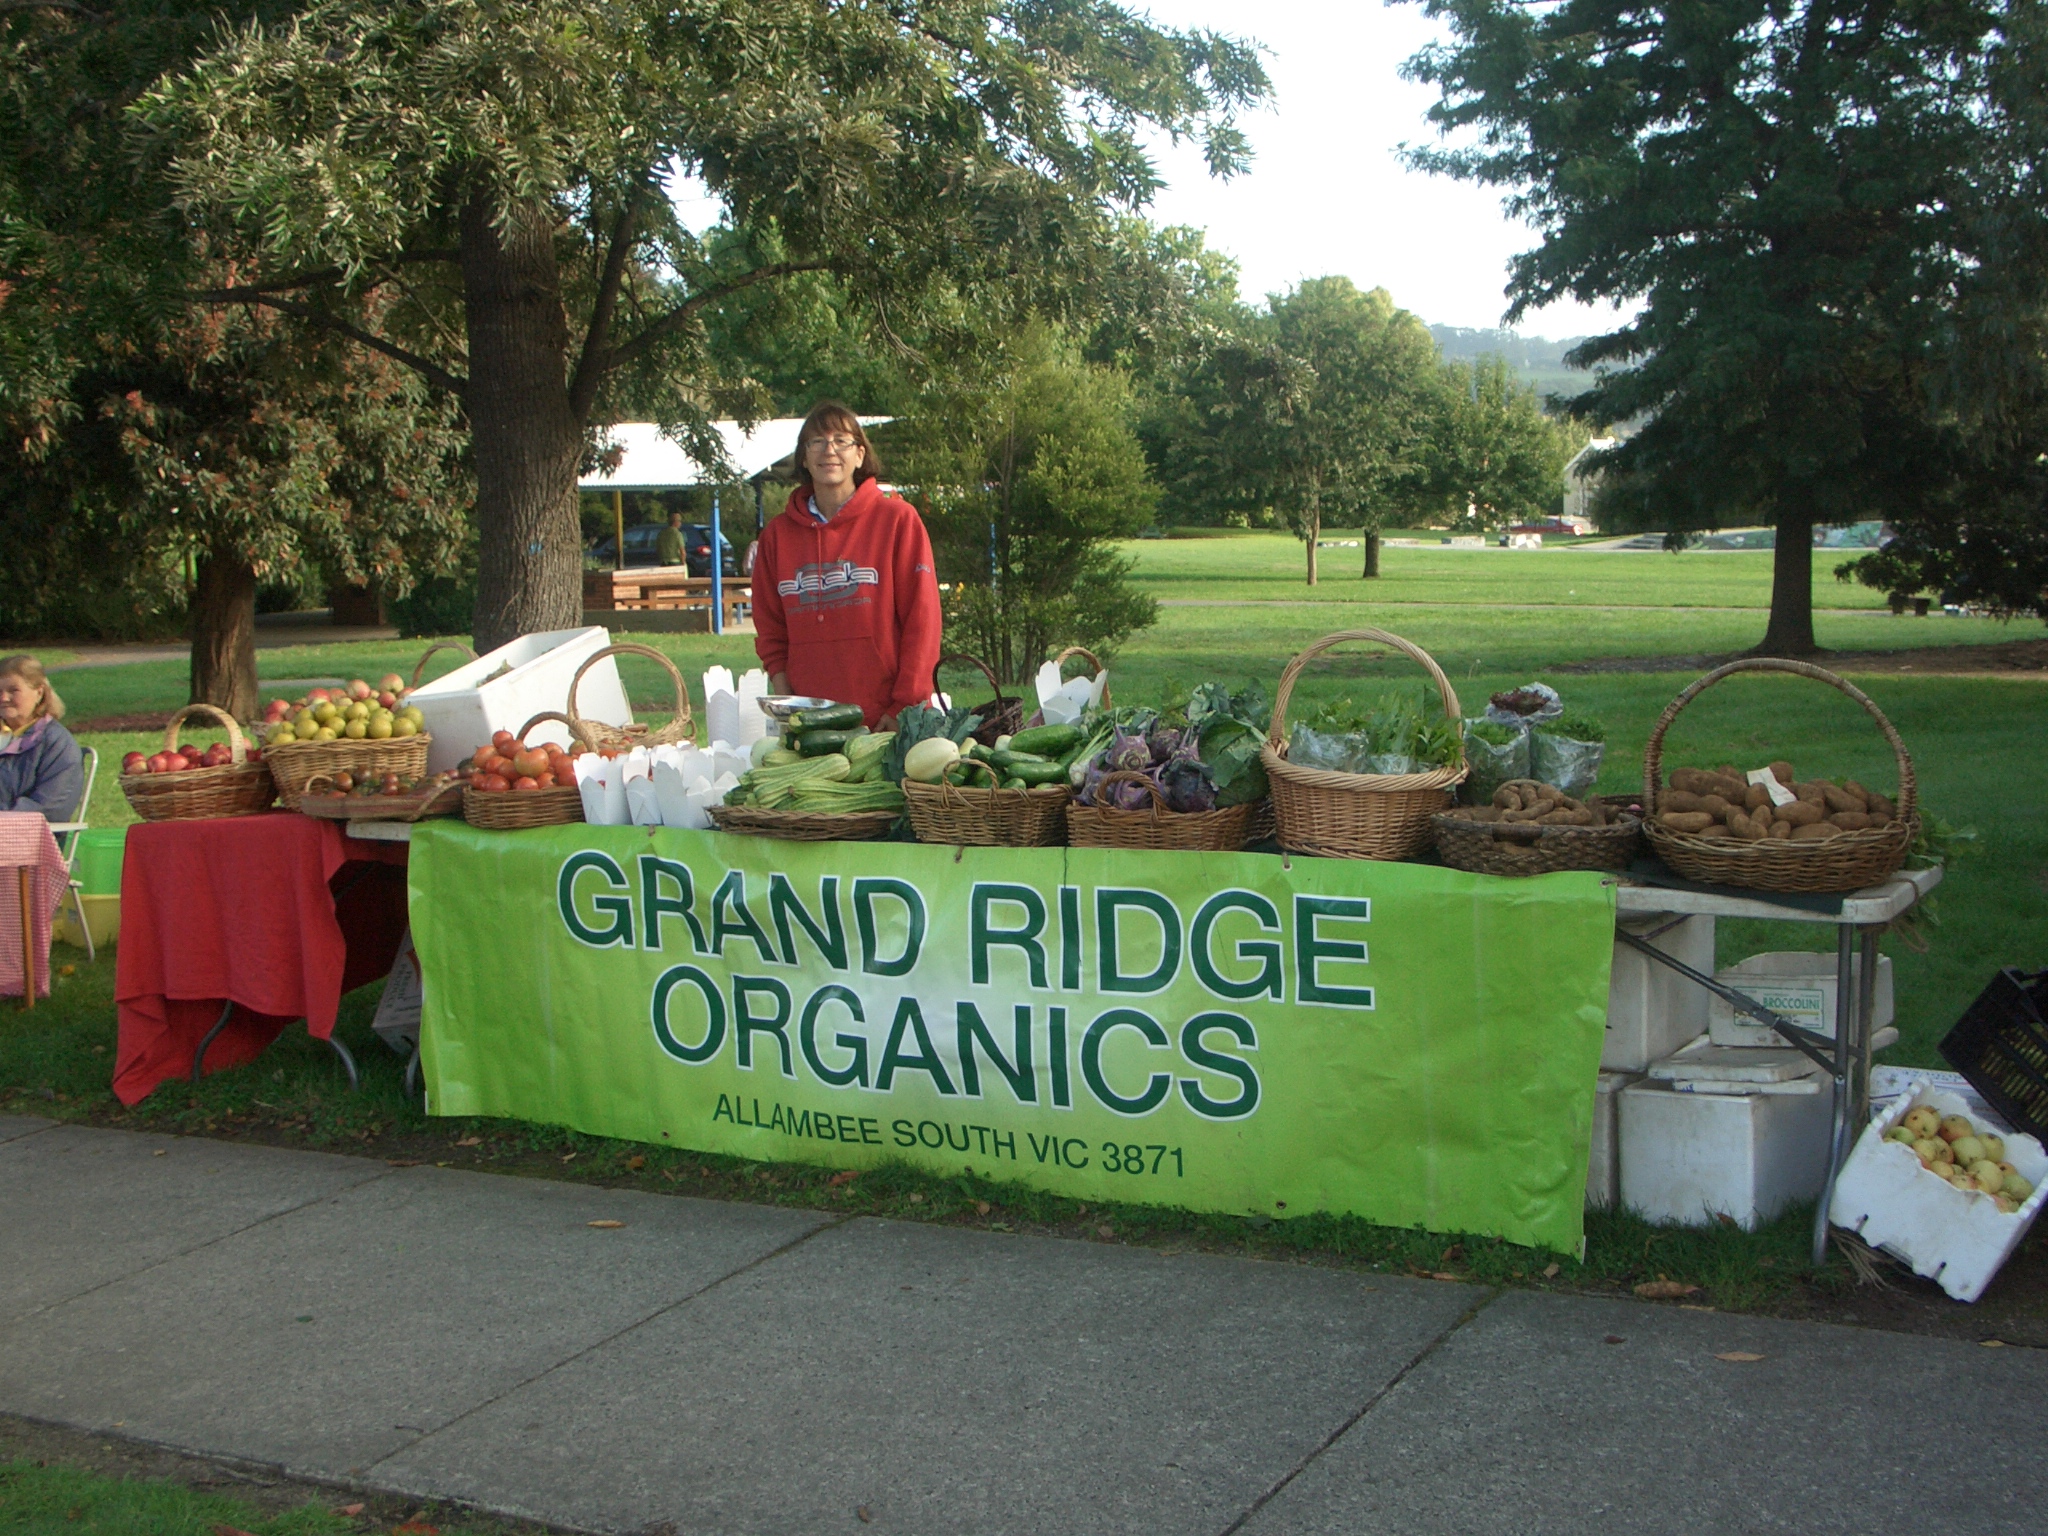 rosie-with-our-mixed-produce-at-mirboo-north-market-2011-prior-to-gaining-our-organic-certification